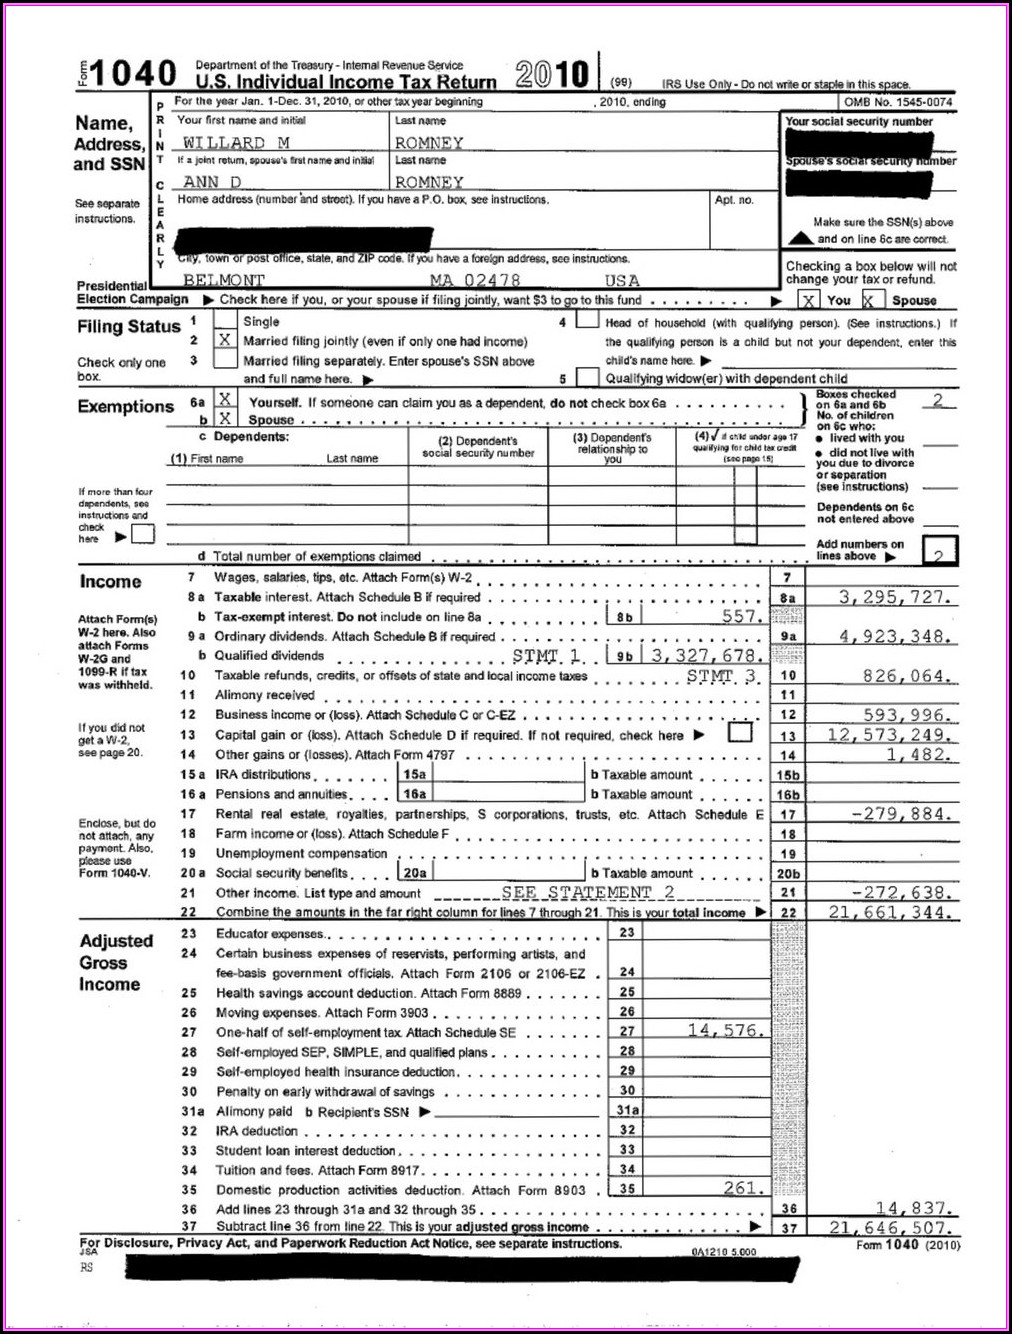 2015 federal income tax form 1040ez instructions